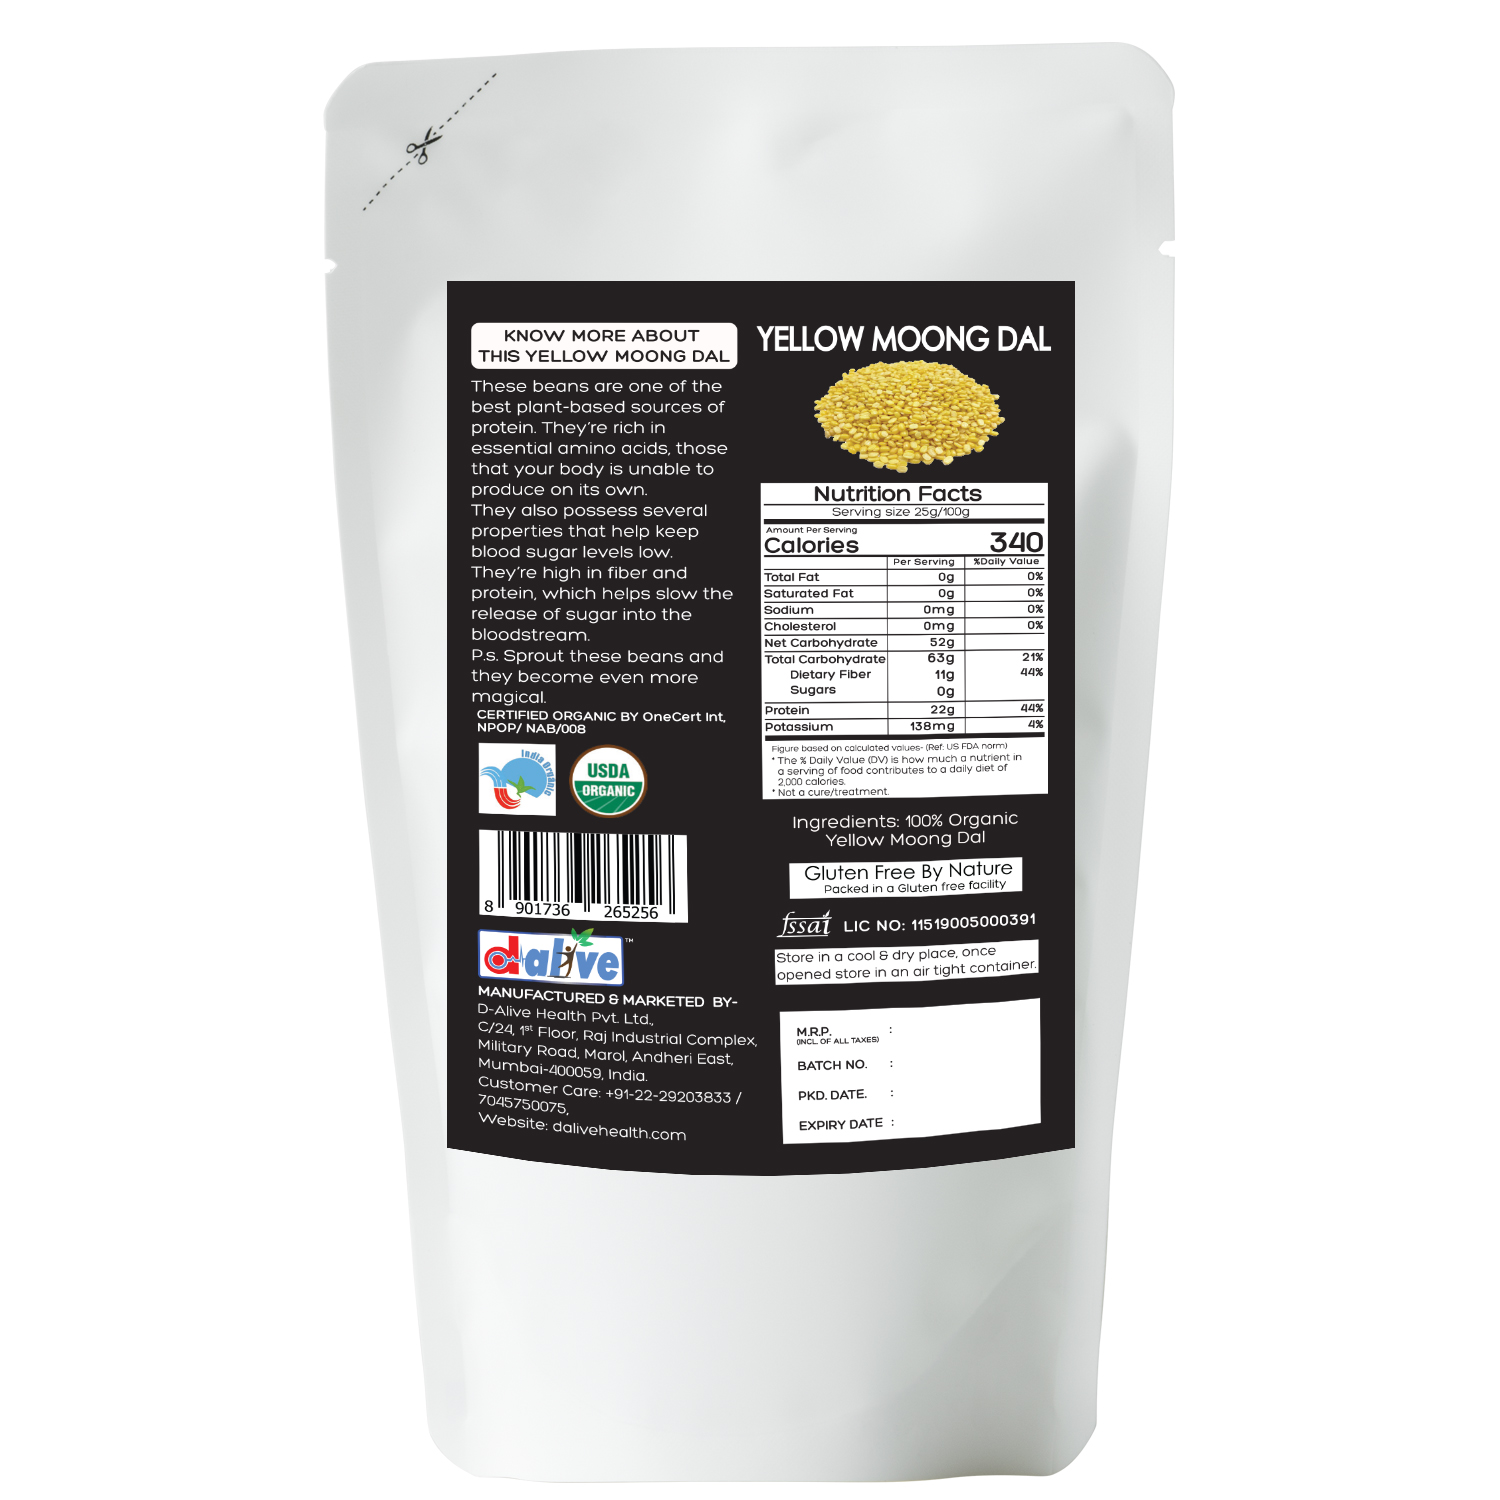 Product: D-alive Plant Based Pea Protein Powder